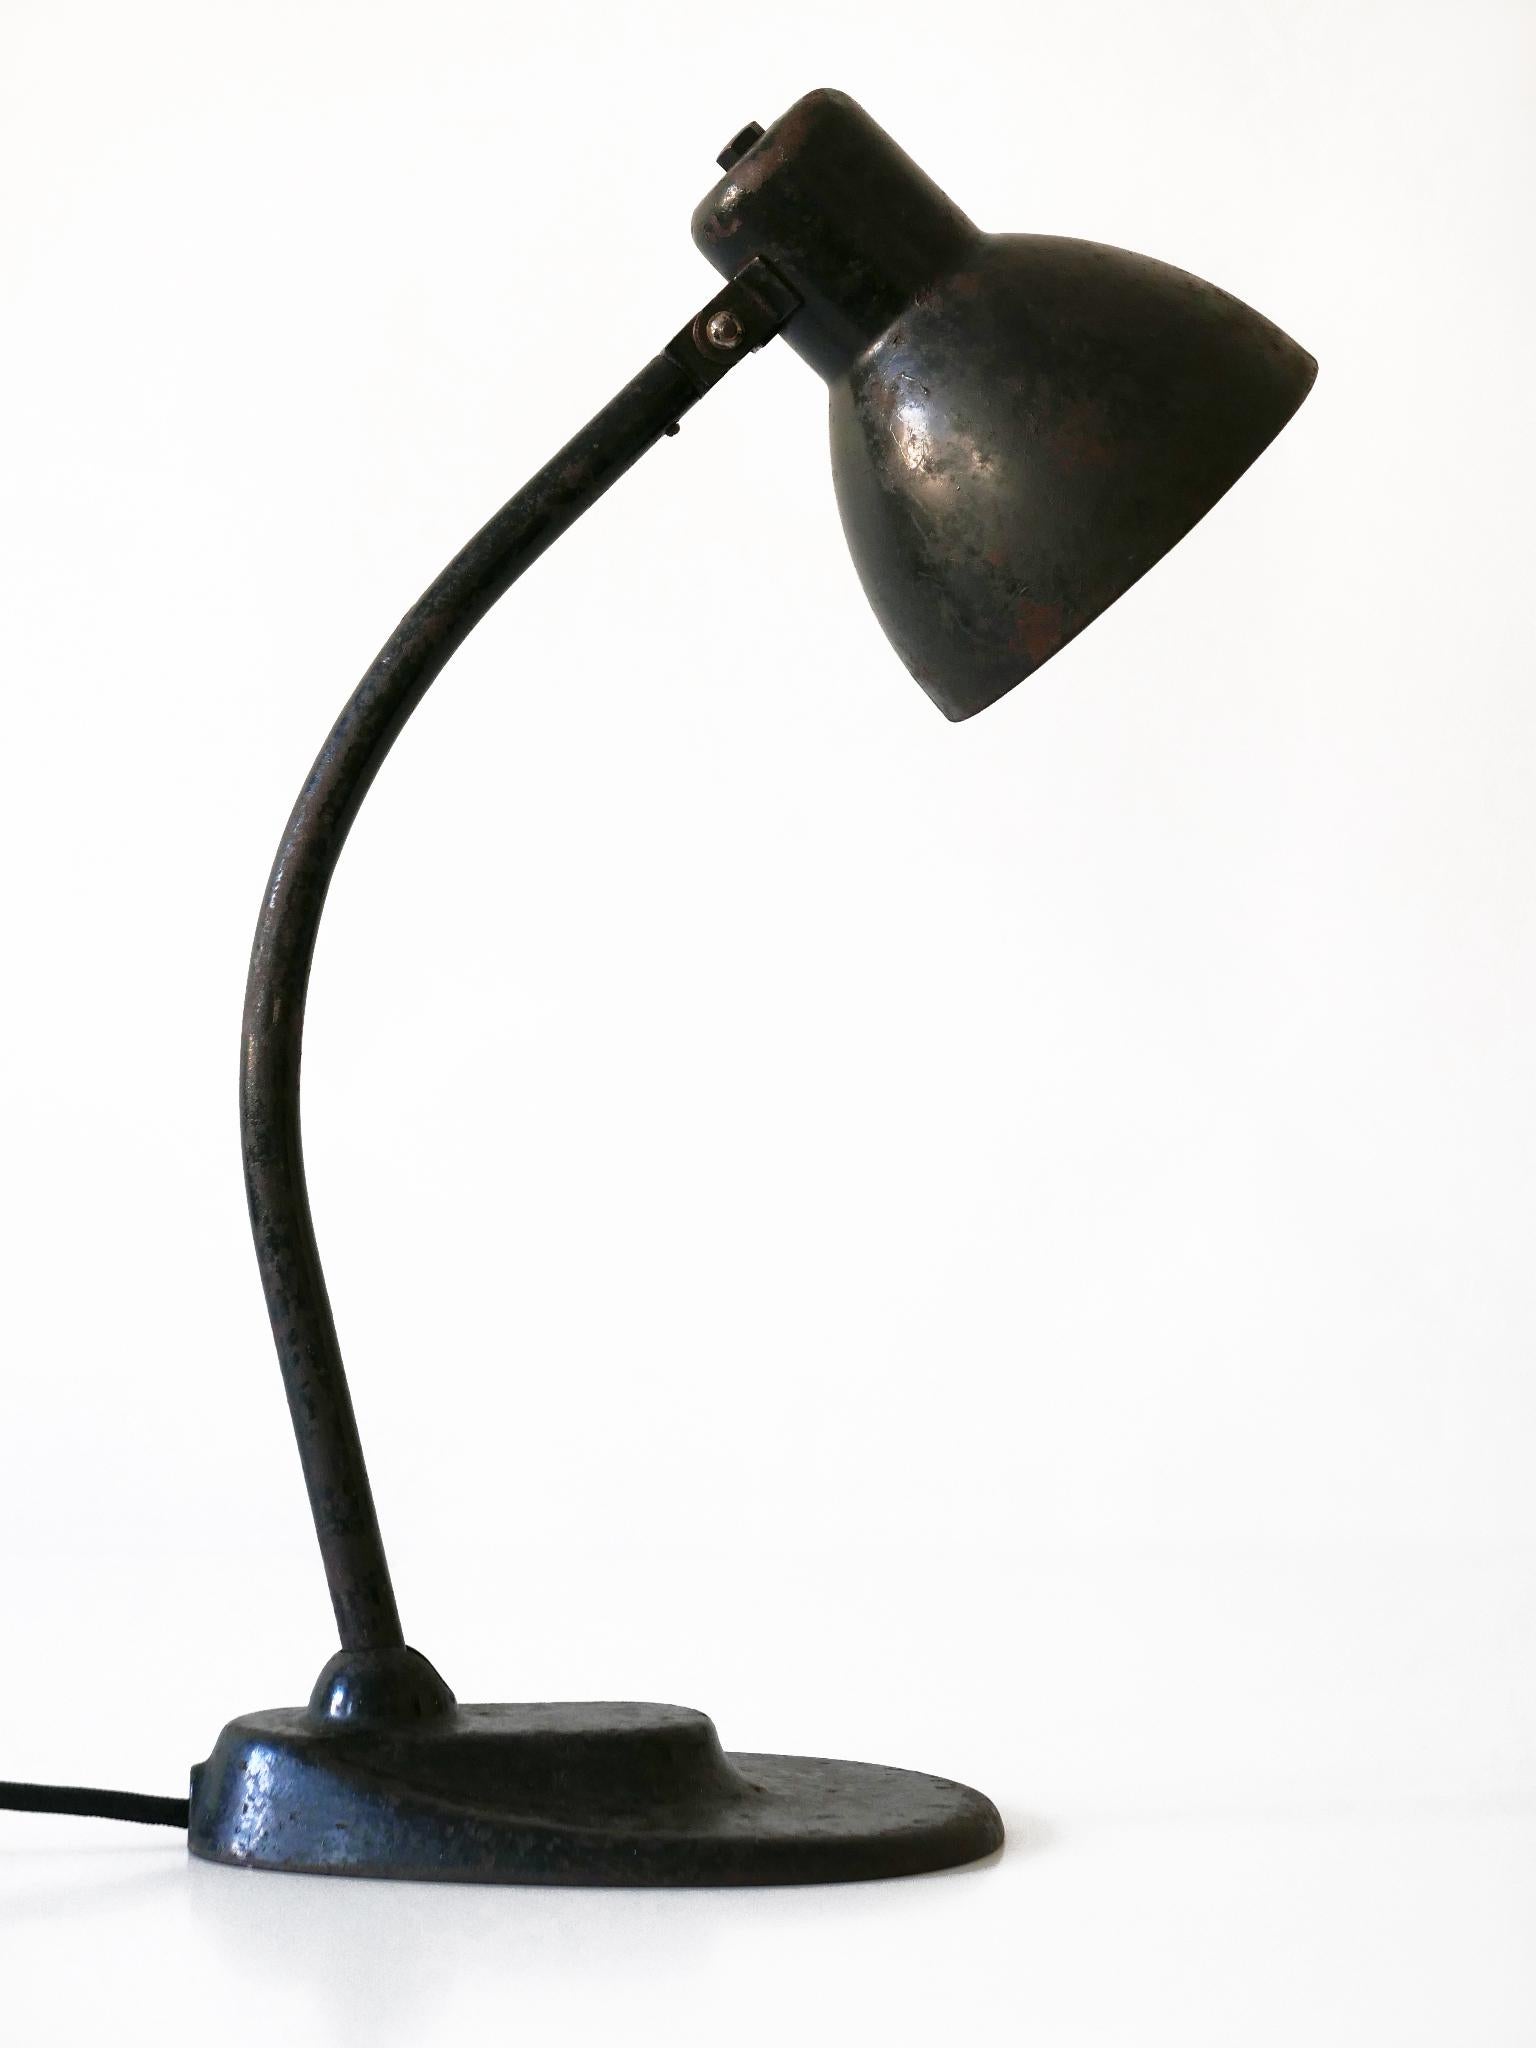 Minimalistic Bauhaus / modernist table lamp or desk light. Adjustable arm and shade. Designed by Brandt & Hin Bredendieck for Kandem (Körting & Mathiesen), 1930s, Germany. Interrupter on the lamp shade.

Executed in black enameled sheet and tubular